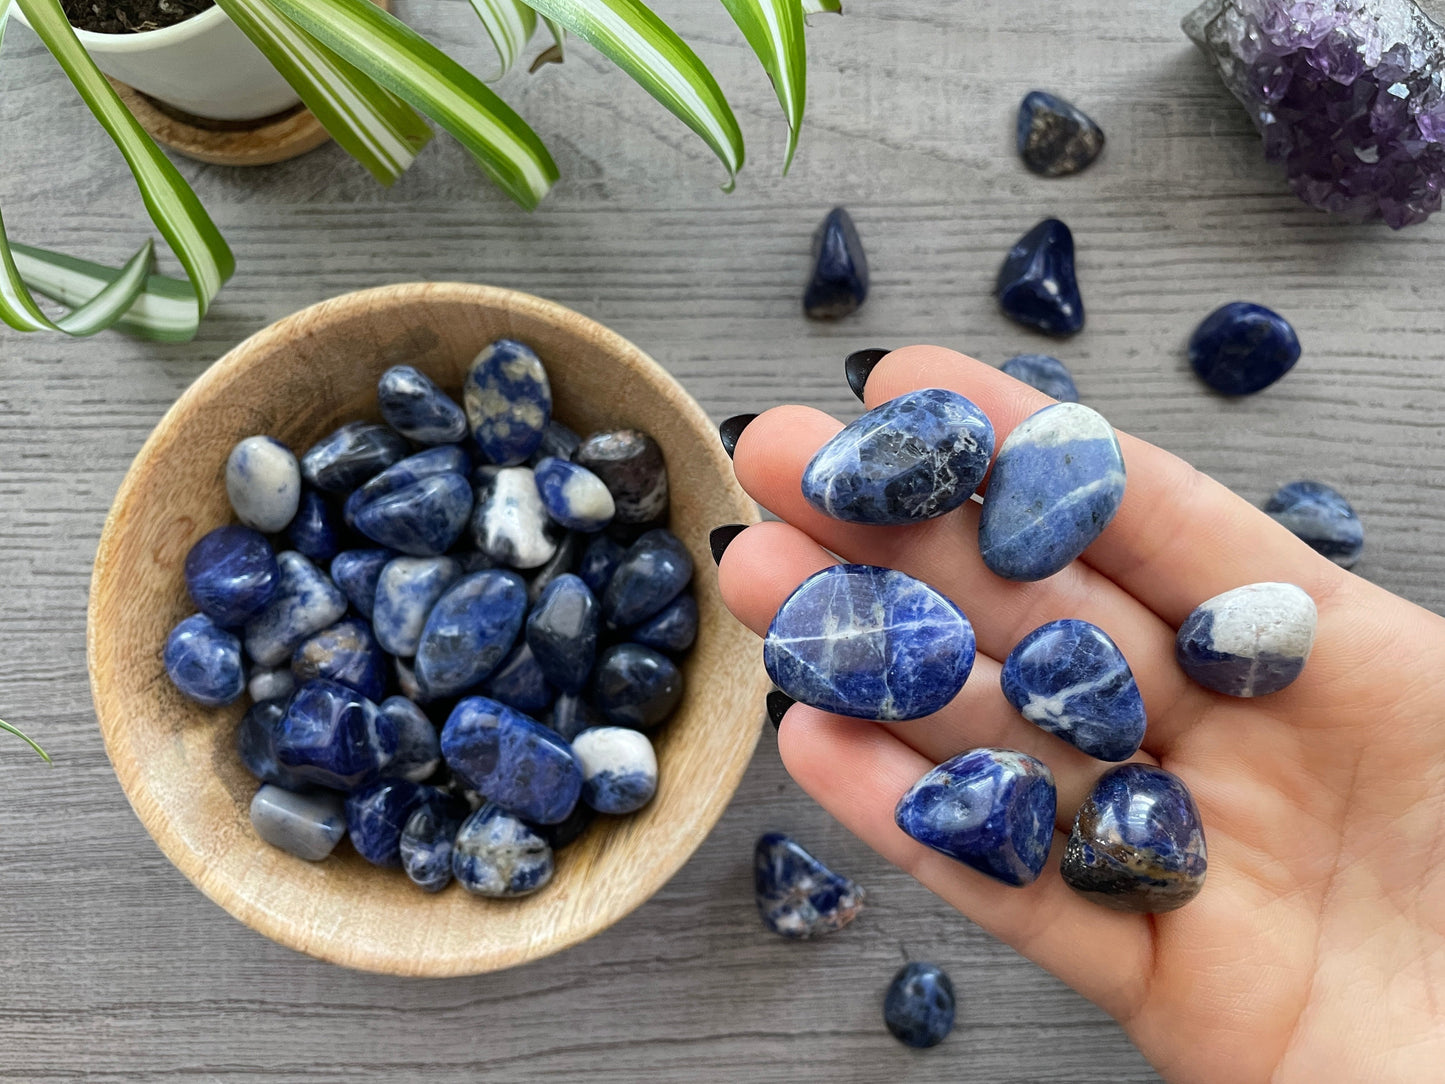 Pictured are various sodalite tumbled stones.